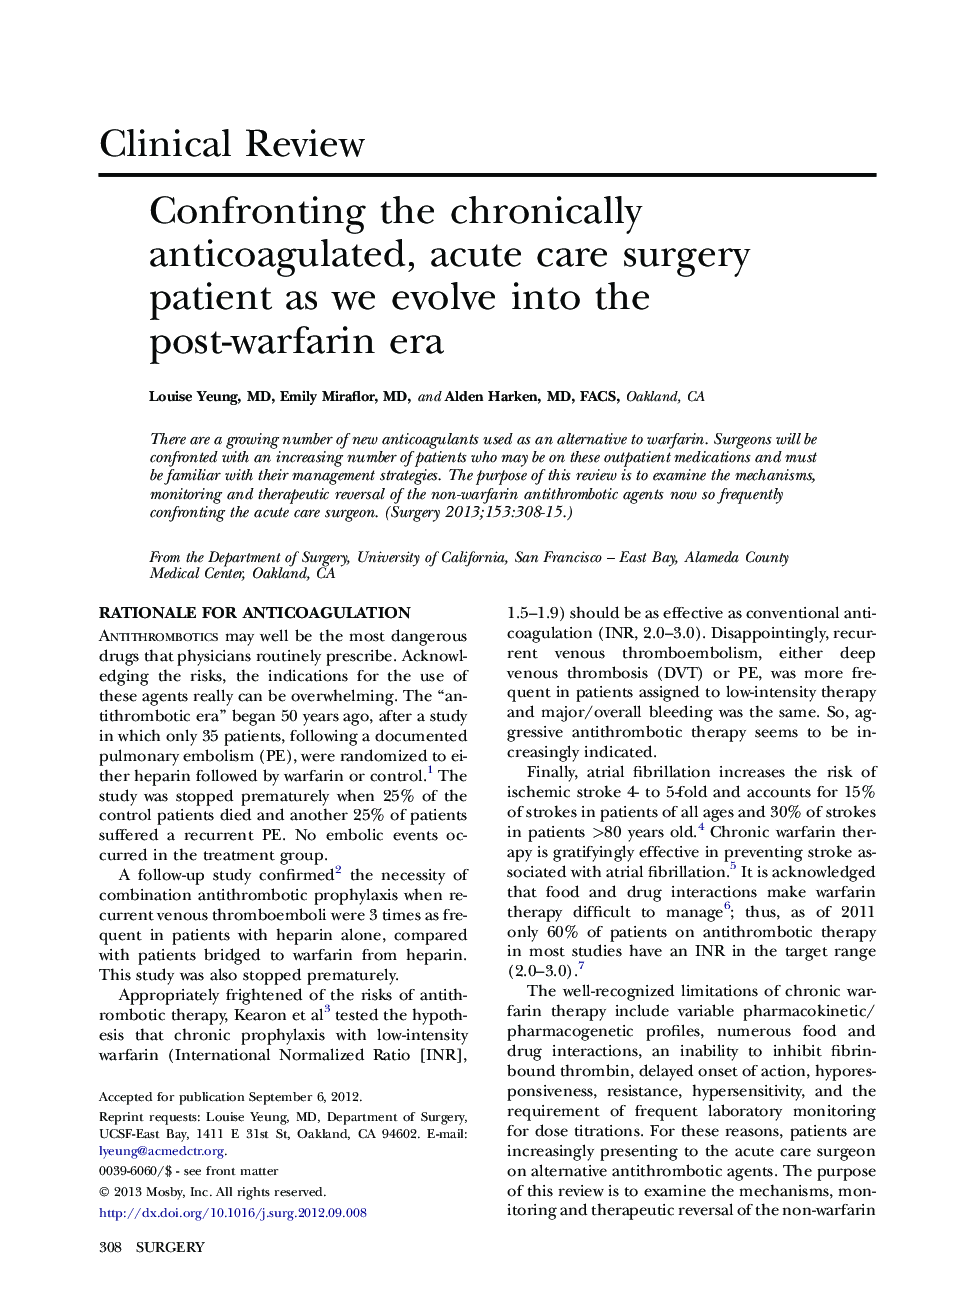 Confronting the chronically anticoagulated, acute care surgery patient as we evolve into the post-warfarin era